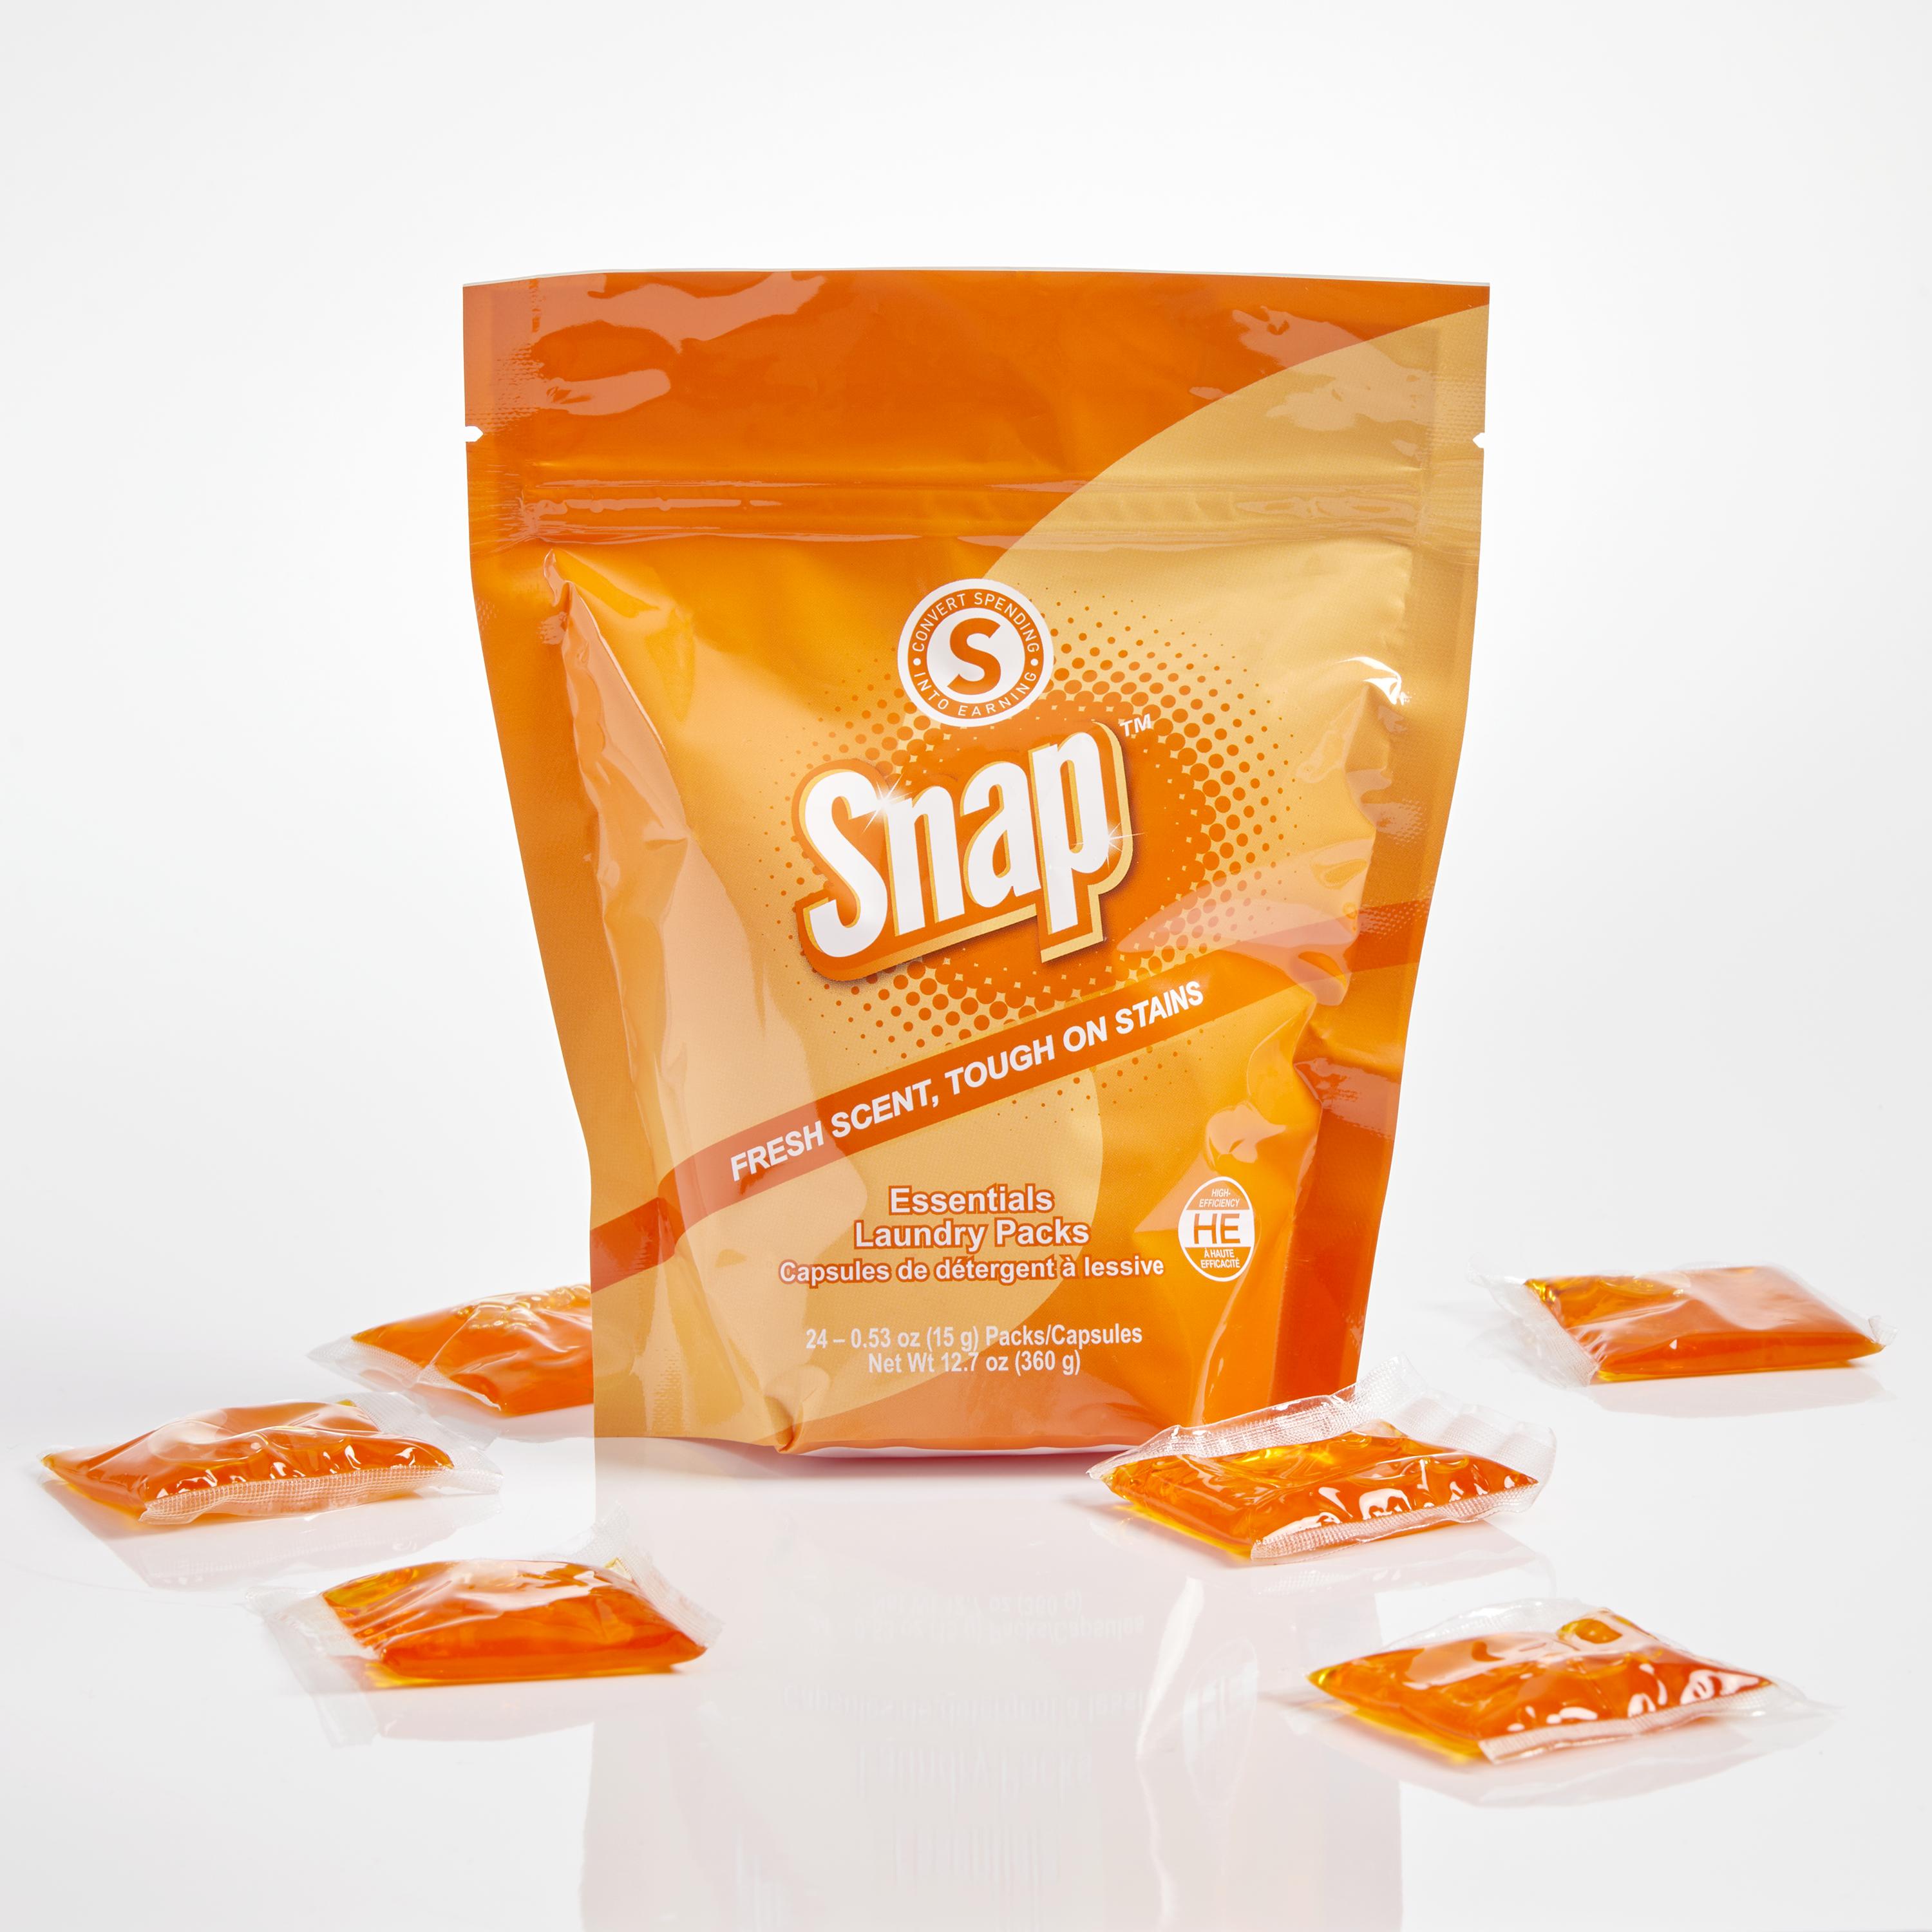 Shopping Annuity Brand SNAP&#8482; Essentials Laundry Packs - Fresh Scent alternate image